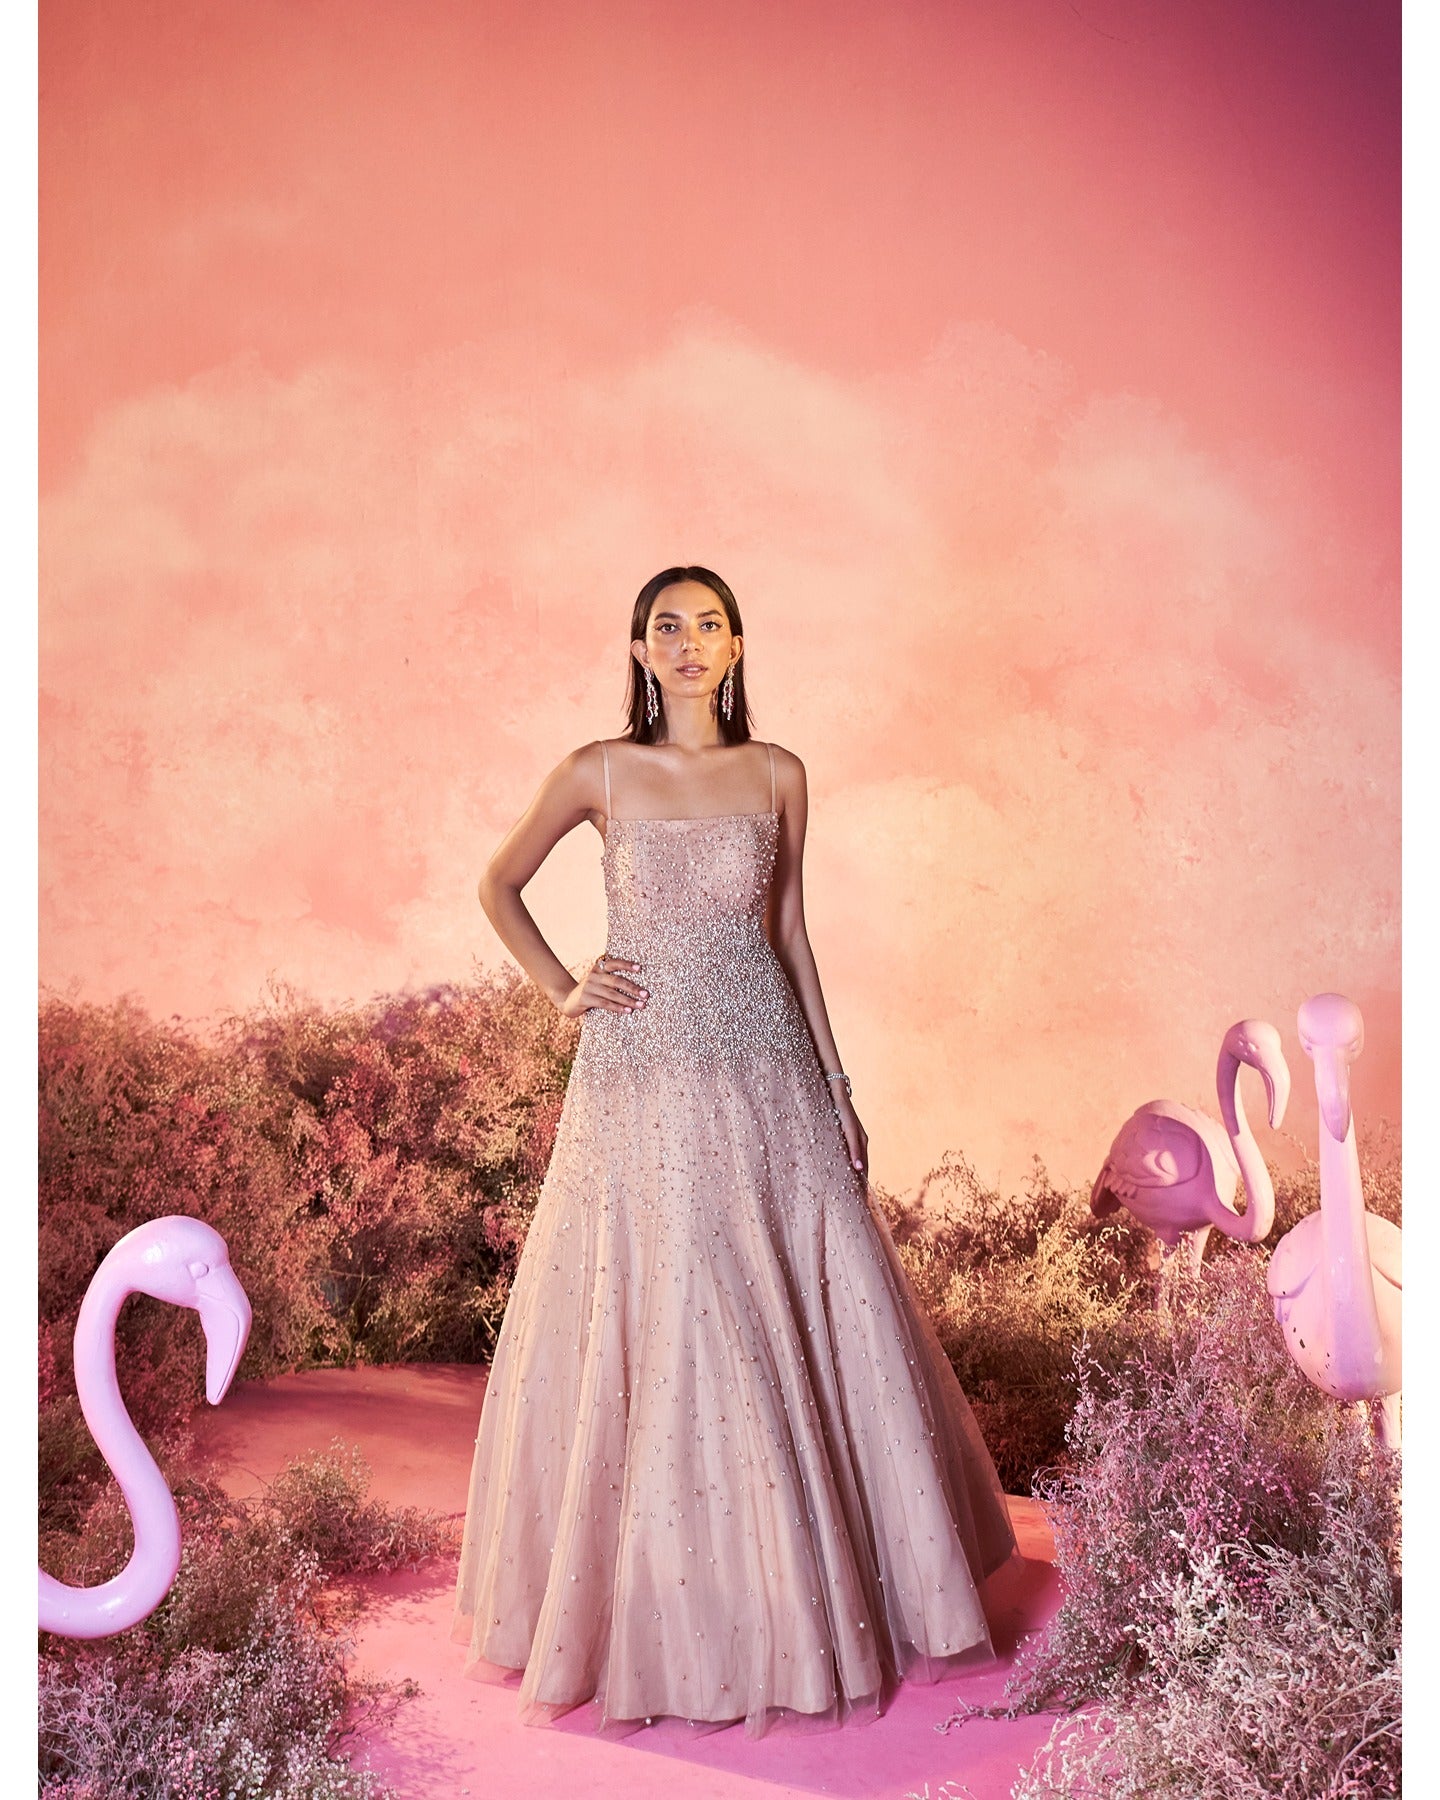 Glowing in subtlety: This light nude hand-embroidered gown is a canvas of delicate craftsmanship and timeless charm.